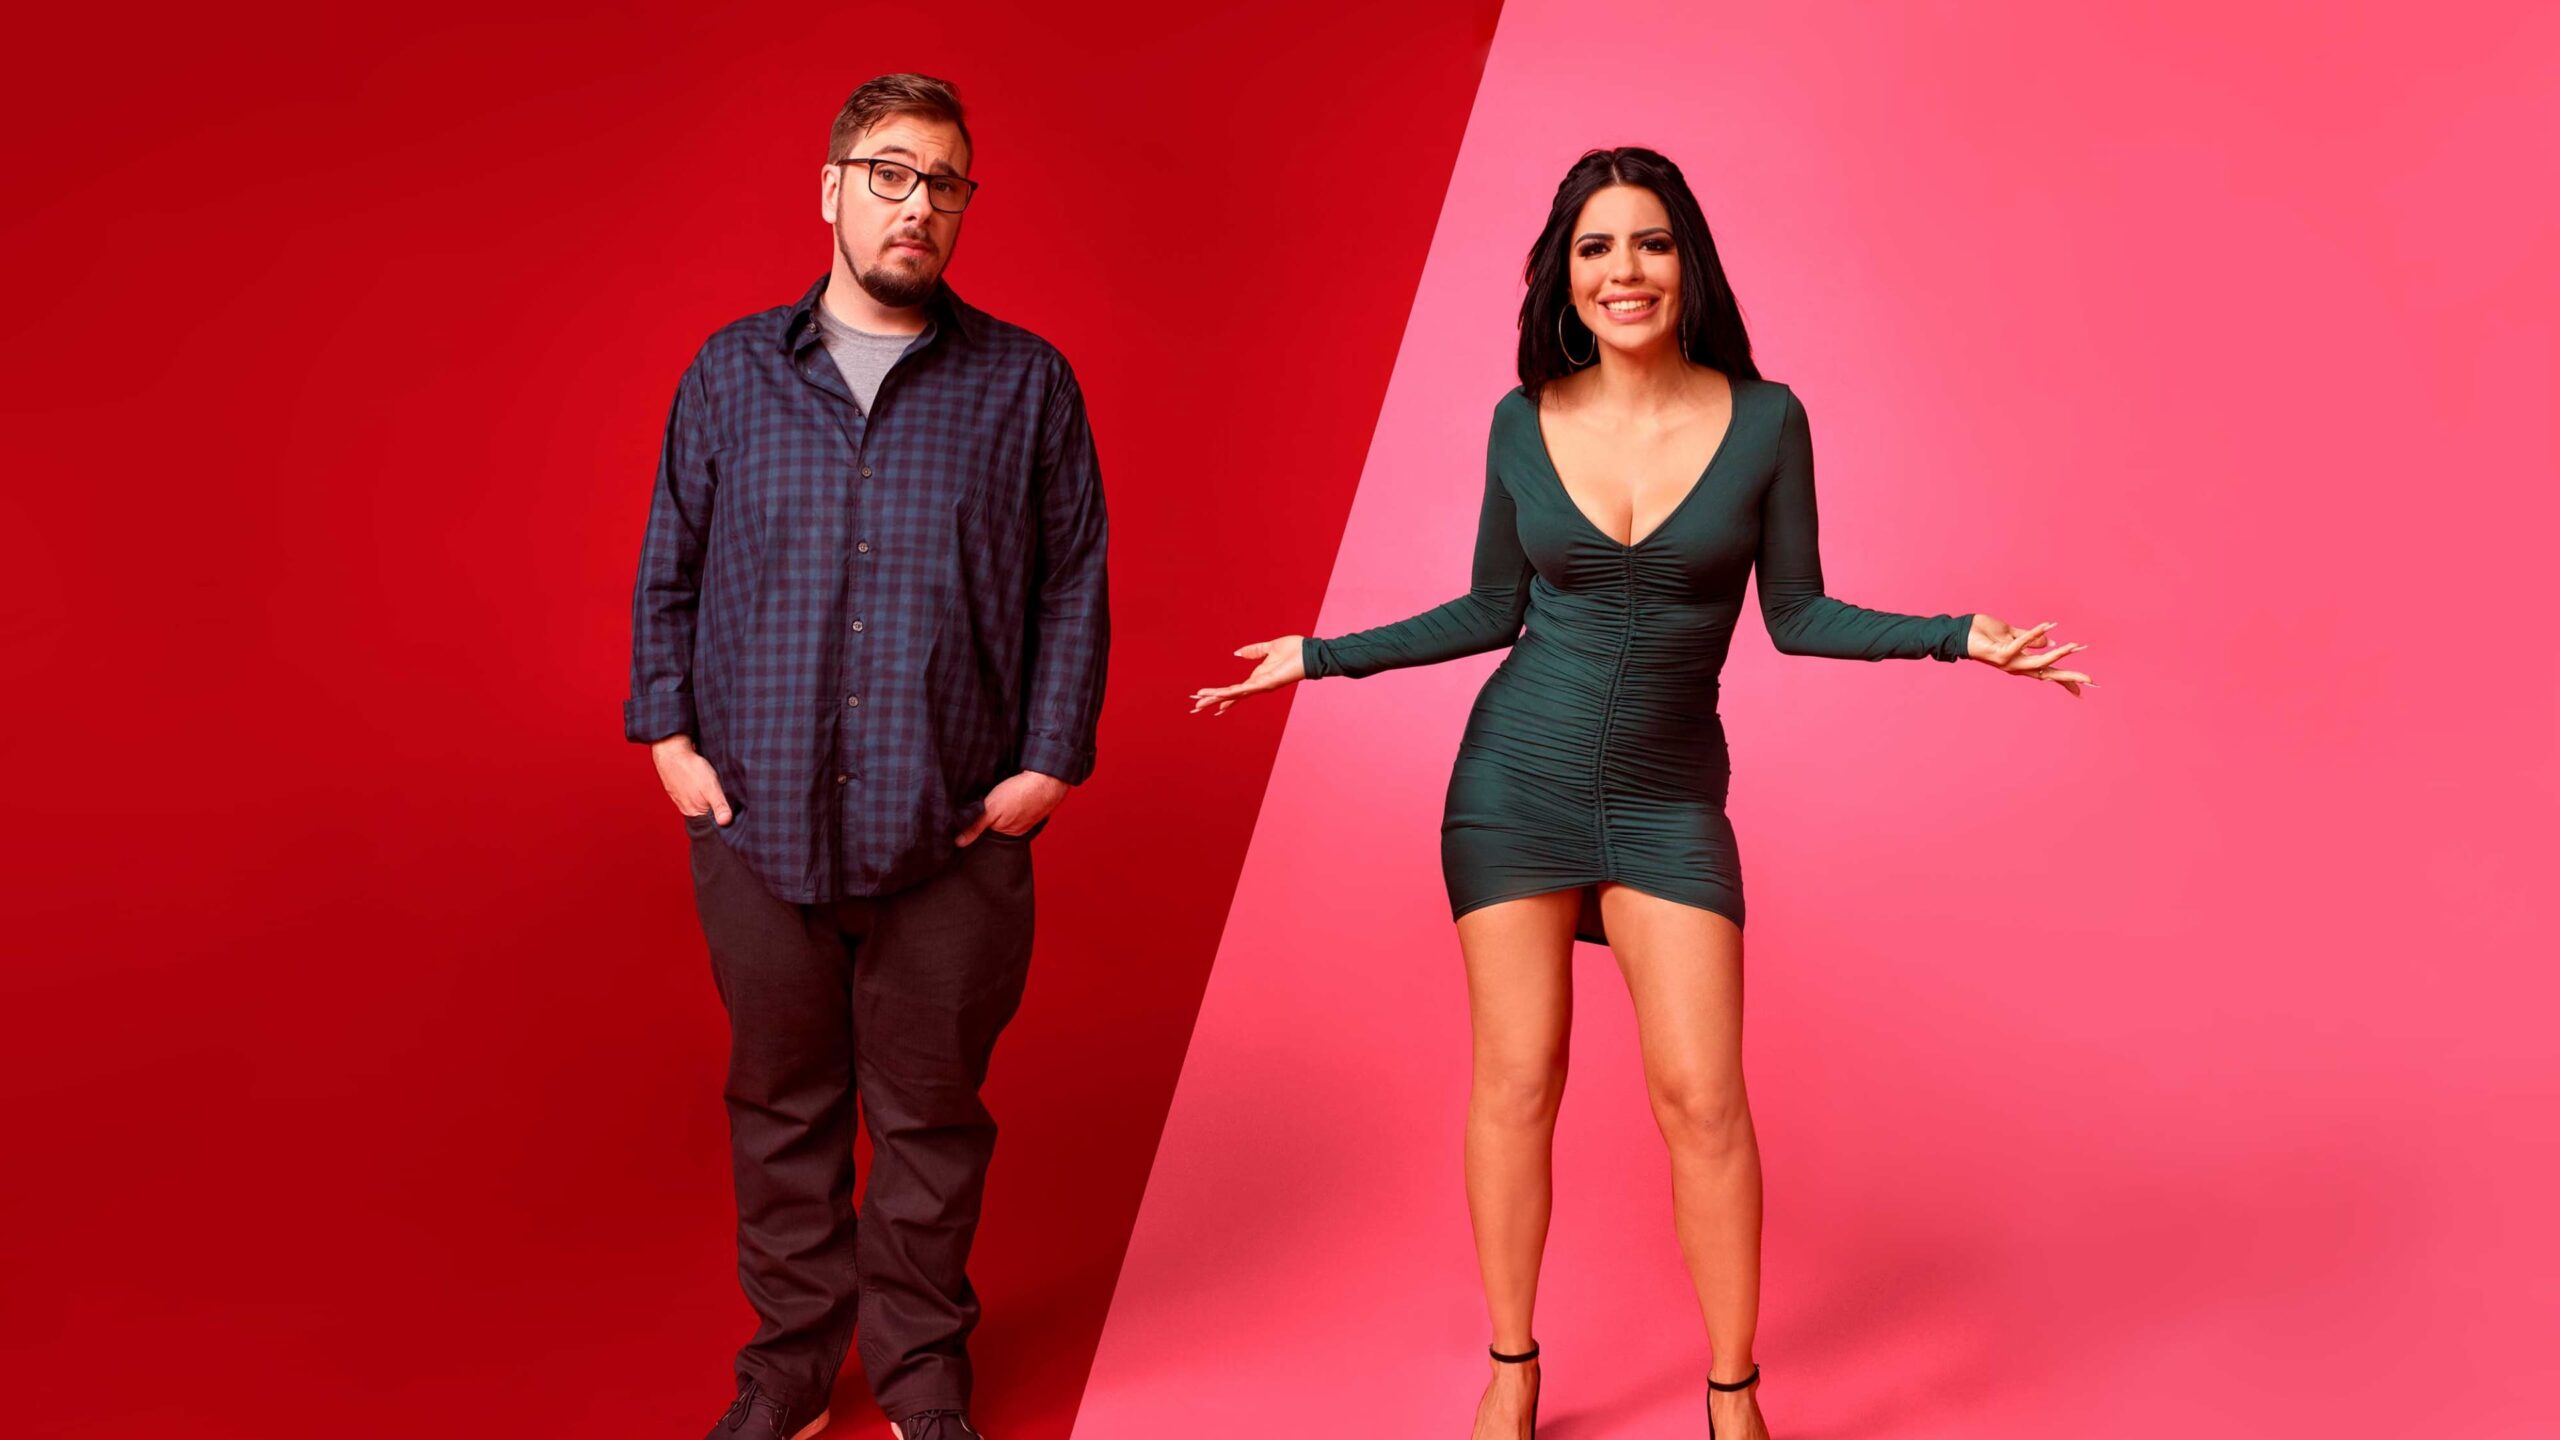 90 Day Fiancé: Happily Ever After? season 8